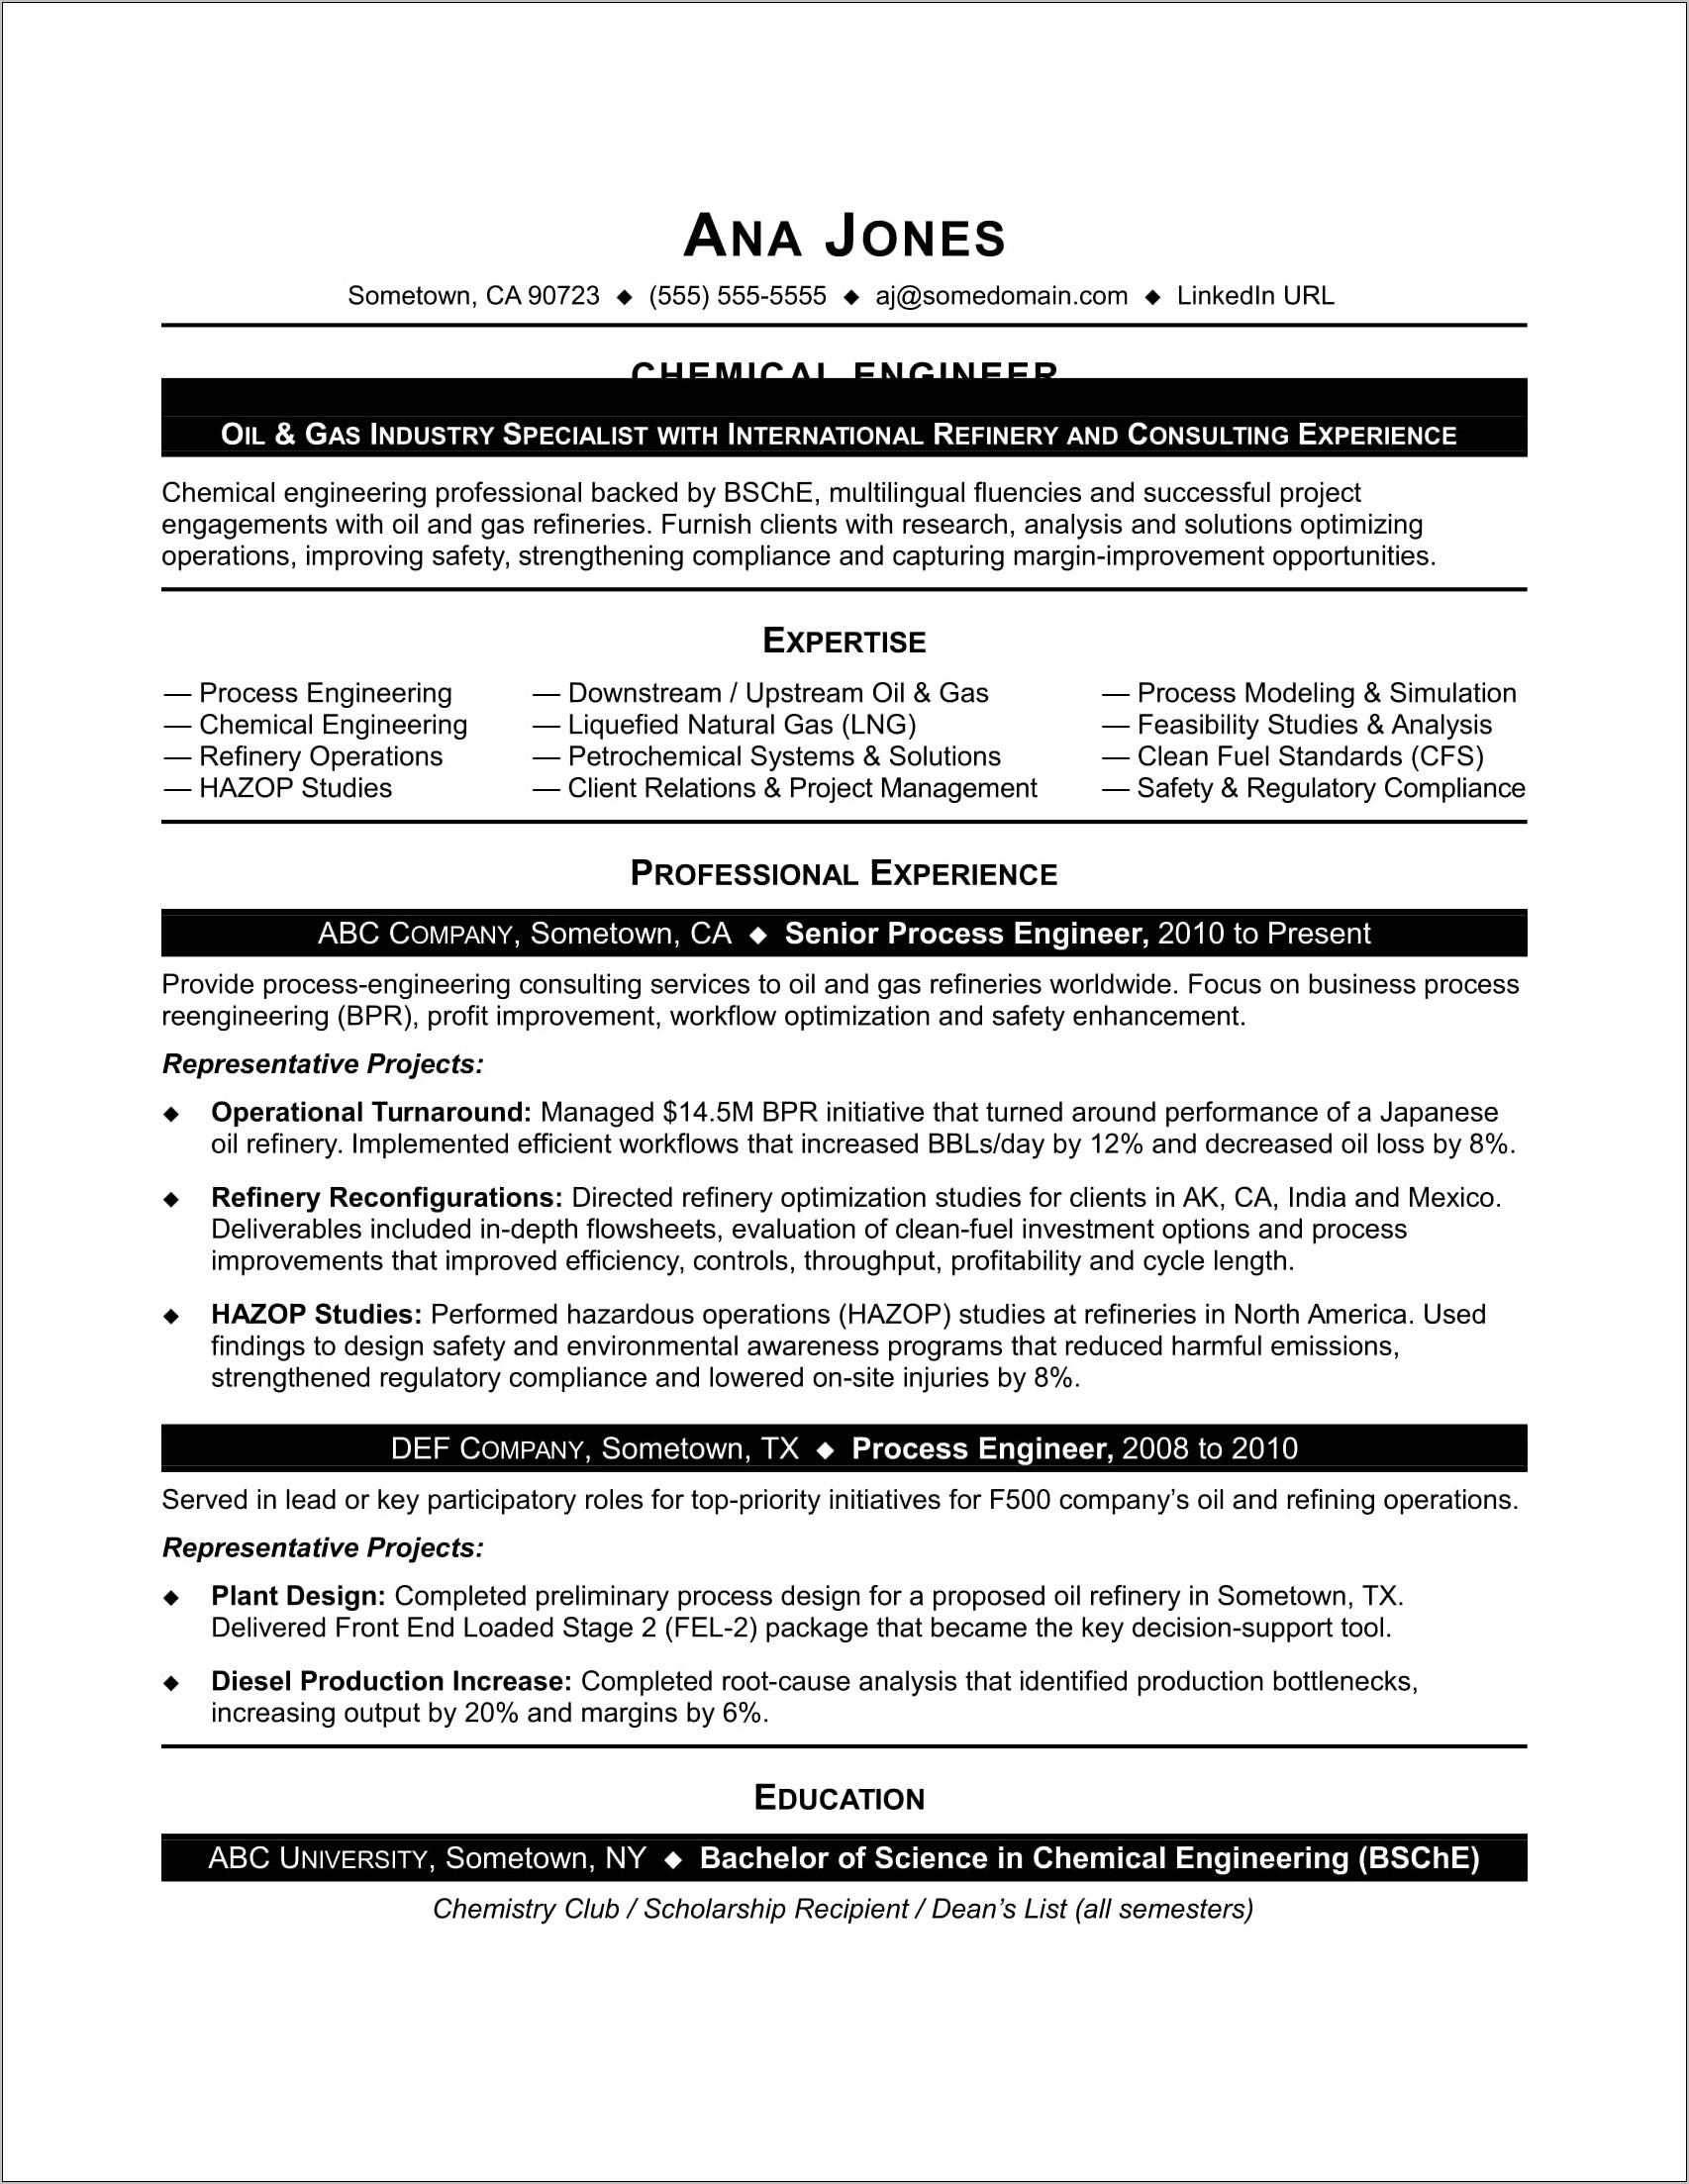 Sample Resume For Freshers It Engineers